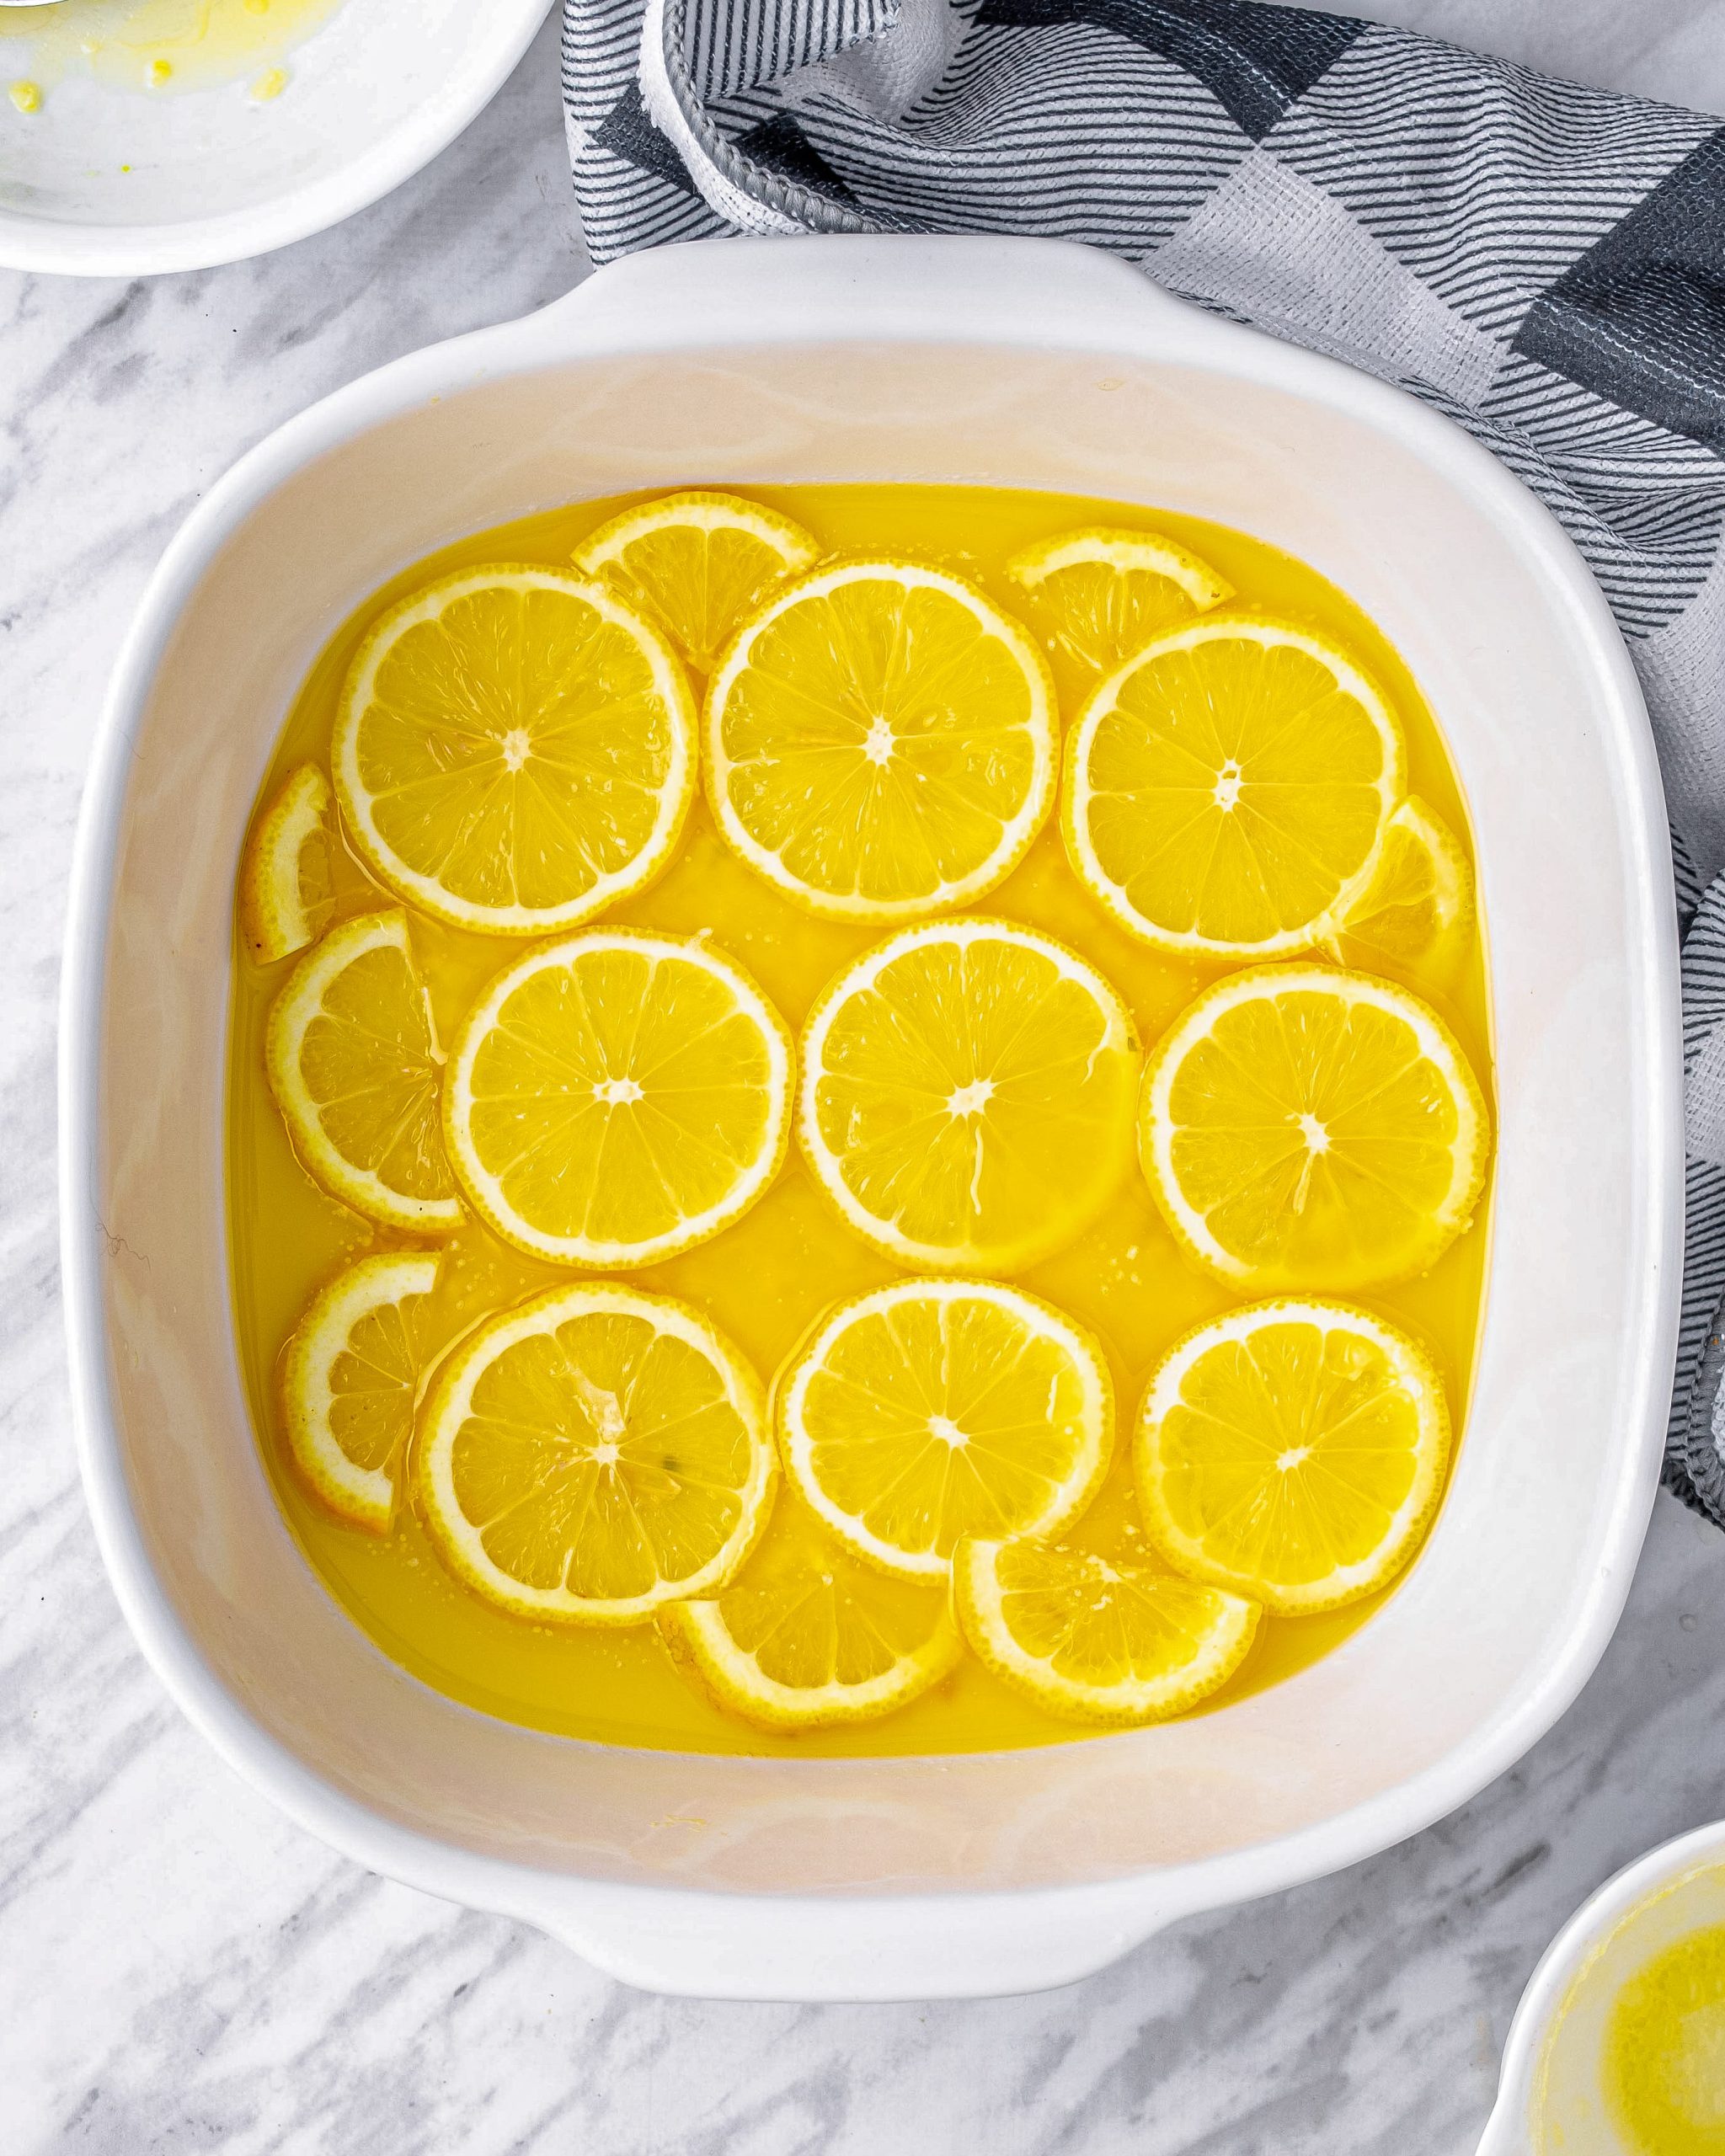 Arrange the lemon slices on top of the butter, forming a single layer.